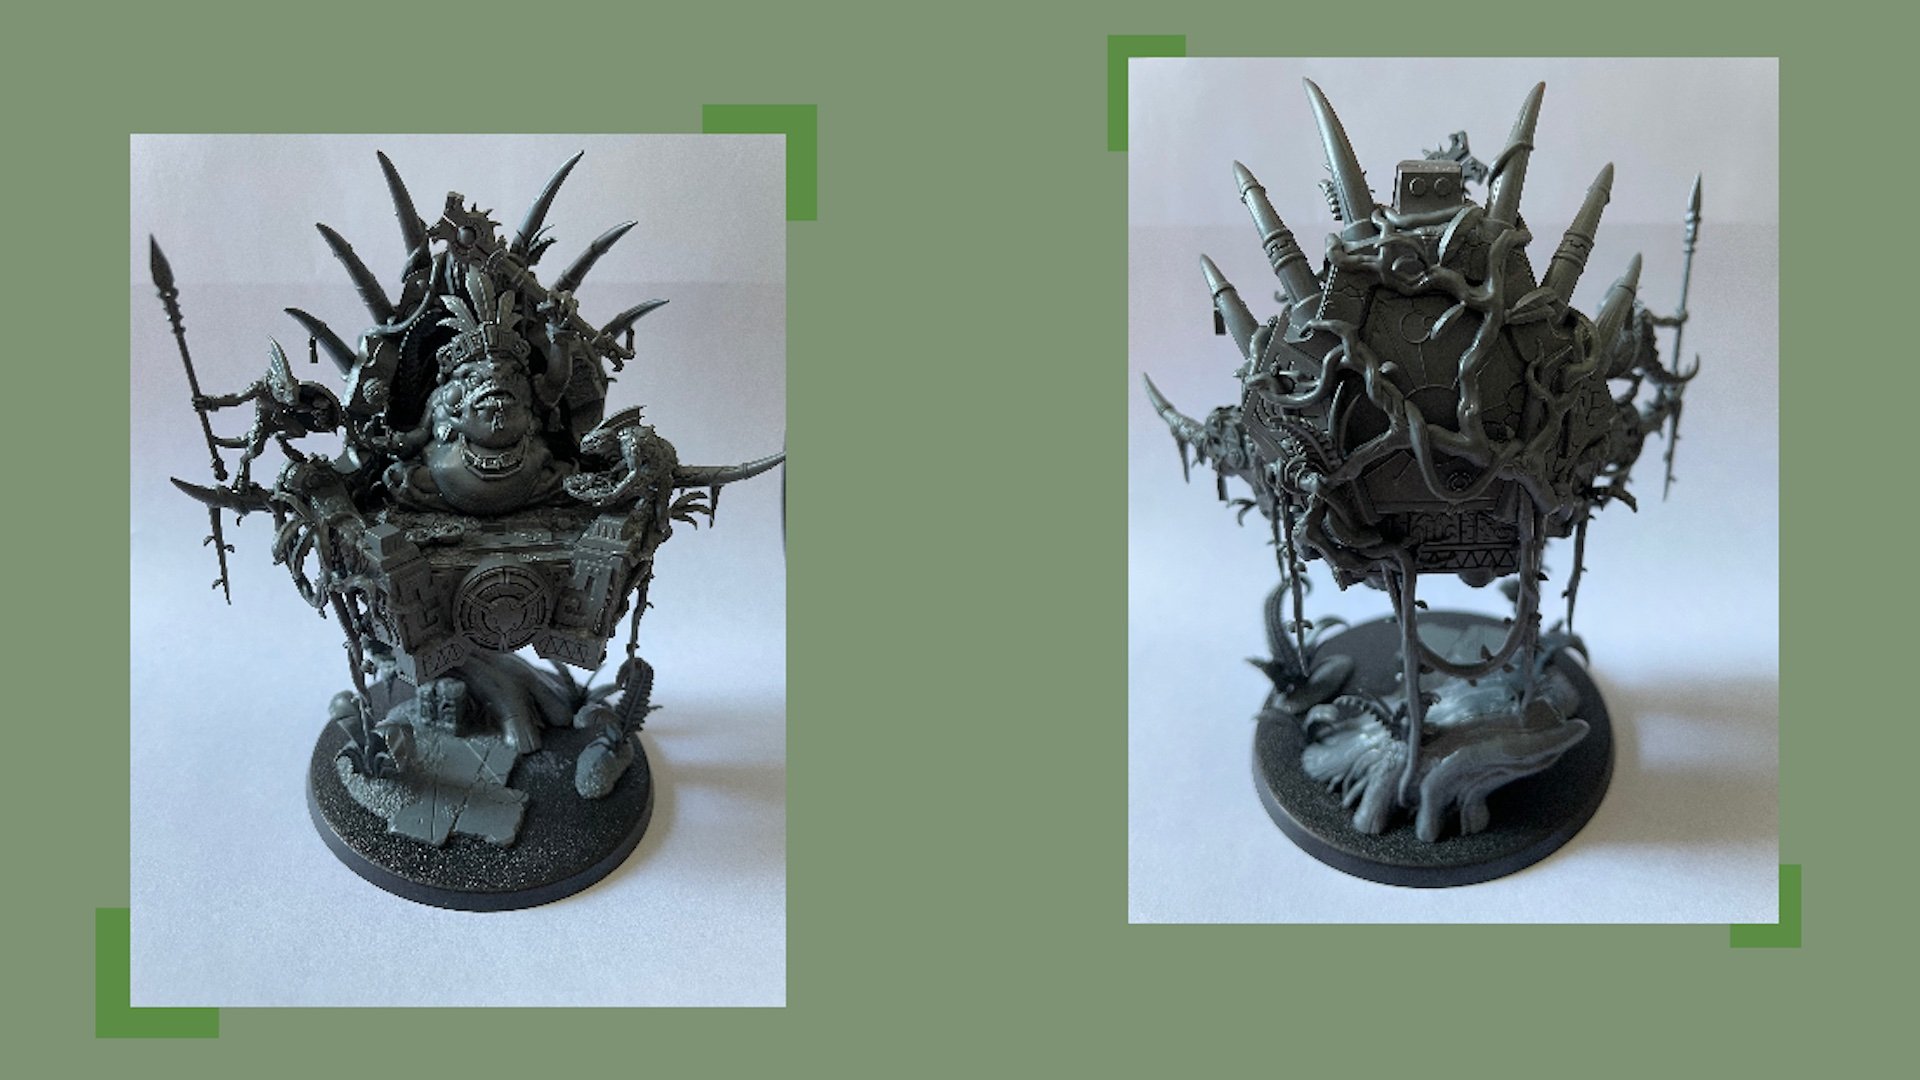 An image of the Warhammer Seraphon Army Set Slann Starmaster, built by the author with photos of the back and front of the model